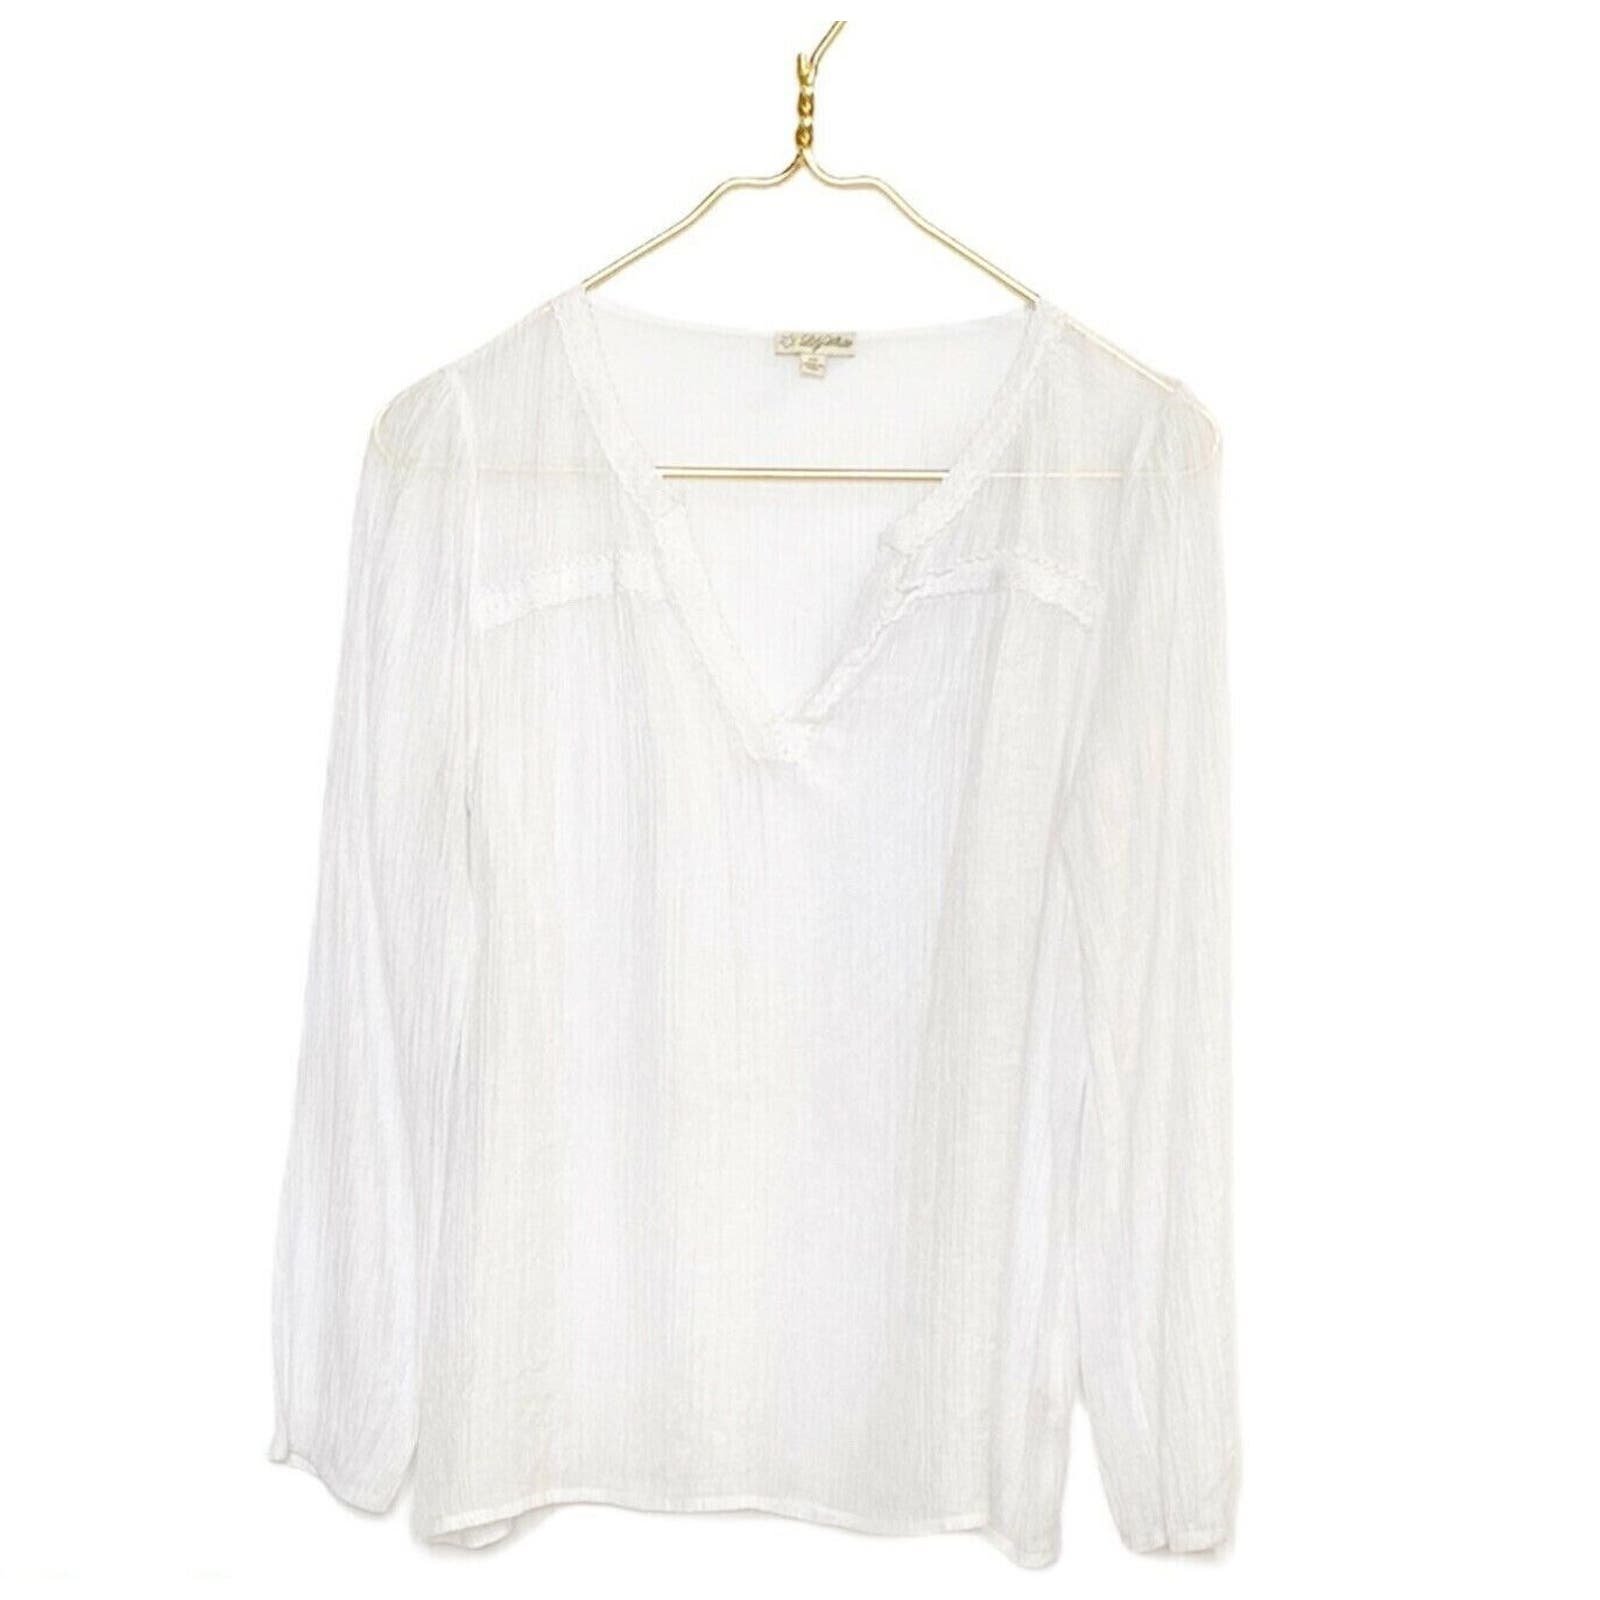 Stylish Lily White V Neck Top Sheer Long Sleeve Of Whit